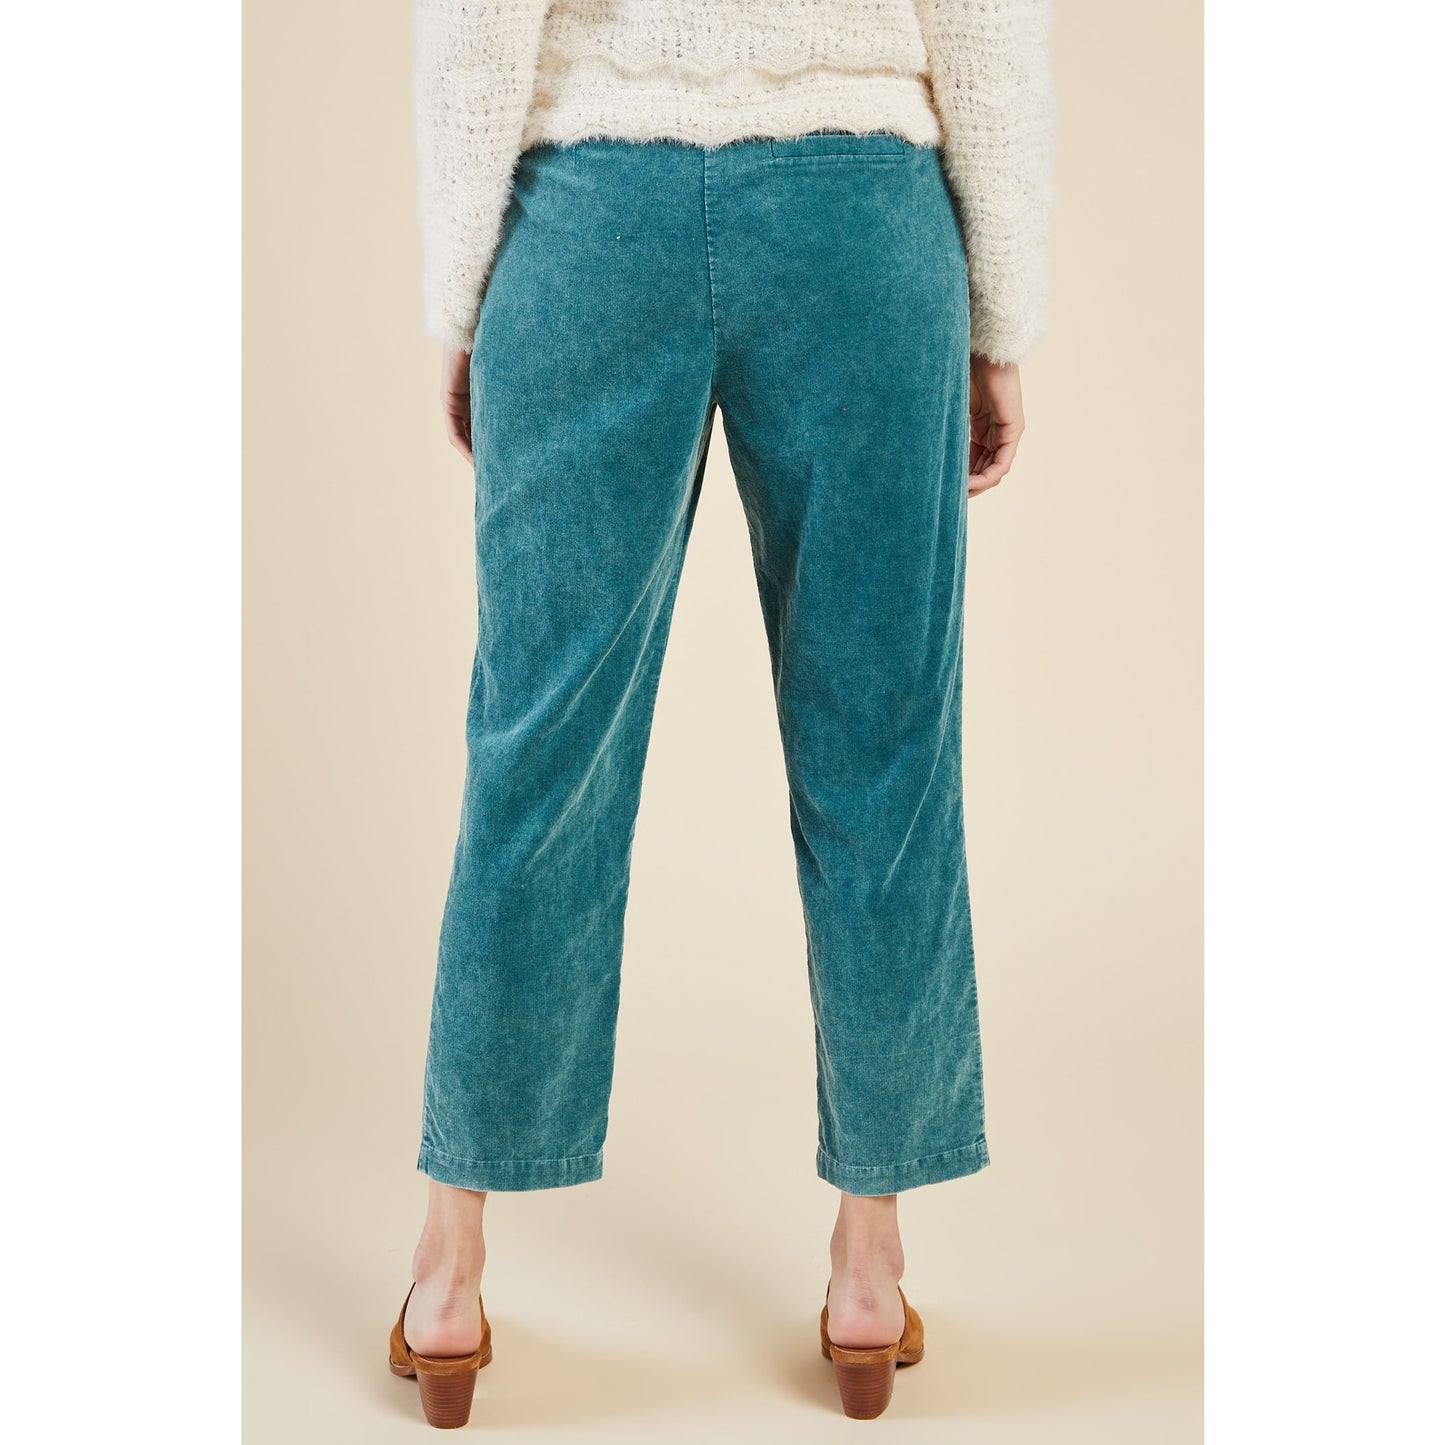 Washed Teal Corduroy Pants - Wild Luxe Boutique